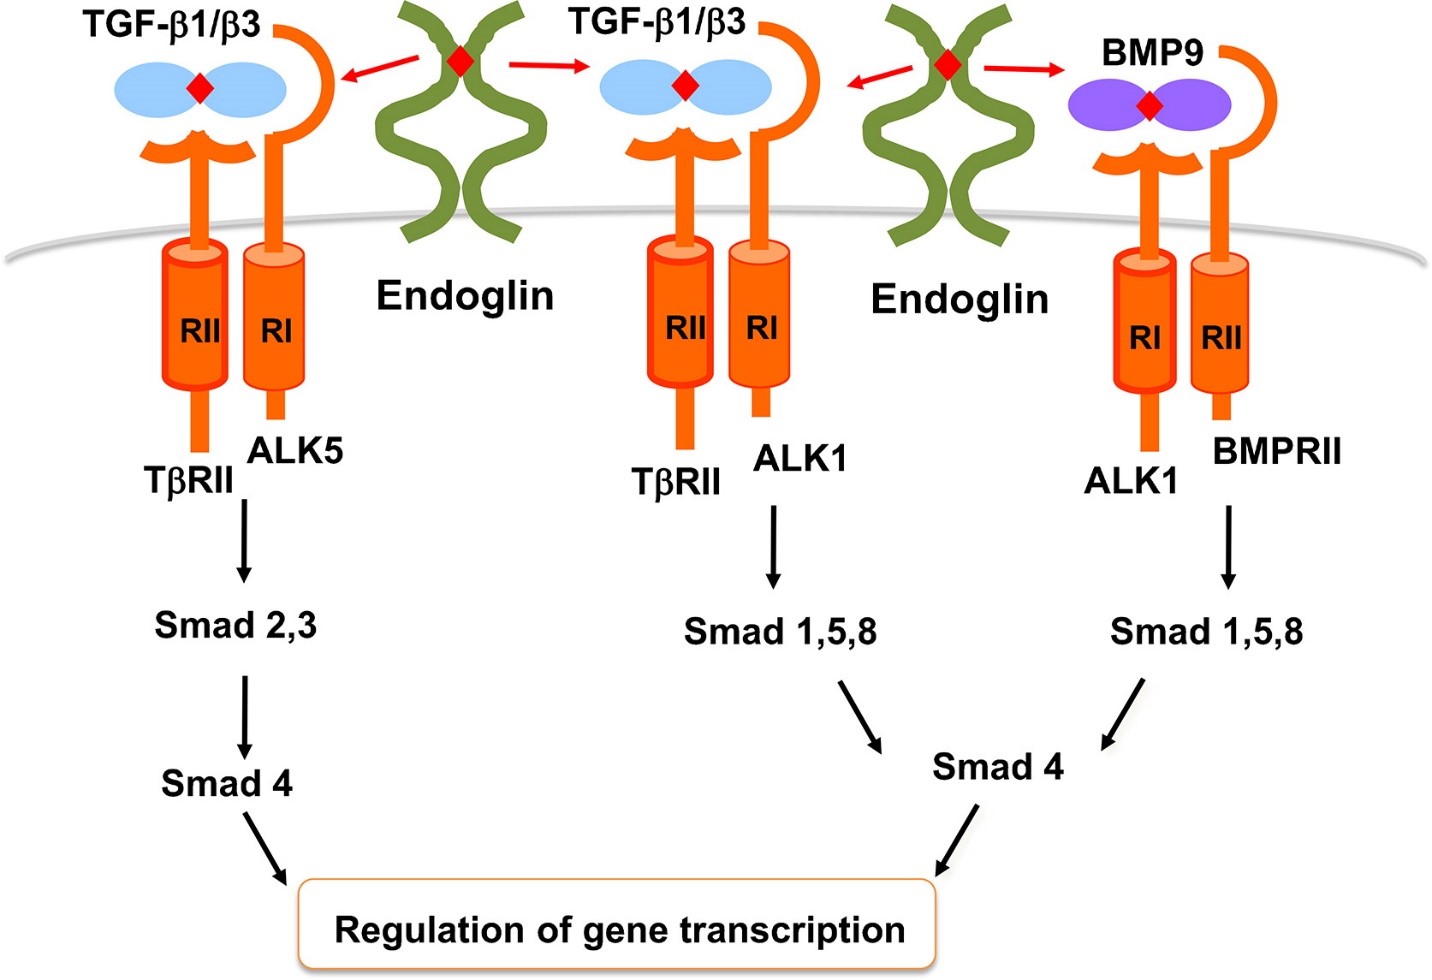 Figure 3: TGF-β and BMP9 signaling pathways in endothelial cells. In endothelial cells, TGF-β1 and –β3 bind to TβRII which then recruits and phosphorylates ALK5 or ALK1. These two type I receptors signal via Smad 2,3 and Smad 1,5,8 respectively. Smad4 is responsible for transfer of Smad complexes to the nucleus where they regulate gene transcription. BMP9 binds to ALK1 and BMPRII and signals via Smad 1,5,8 pathway. Endoglin can modulate all of these pathways in a cell and context-dependent manner. http://www.placentajournal.org/article/S0143-4004(13)00793-5/fulltext